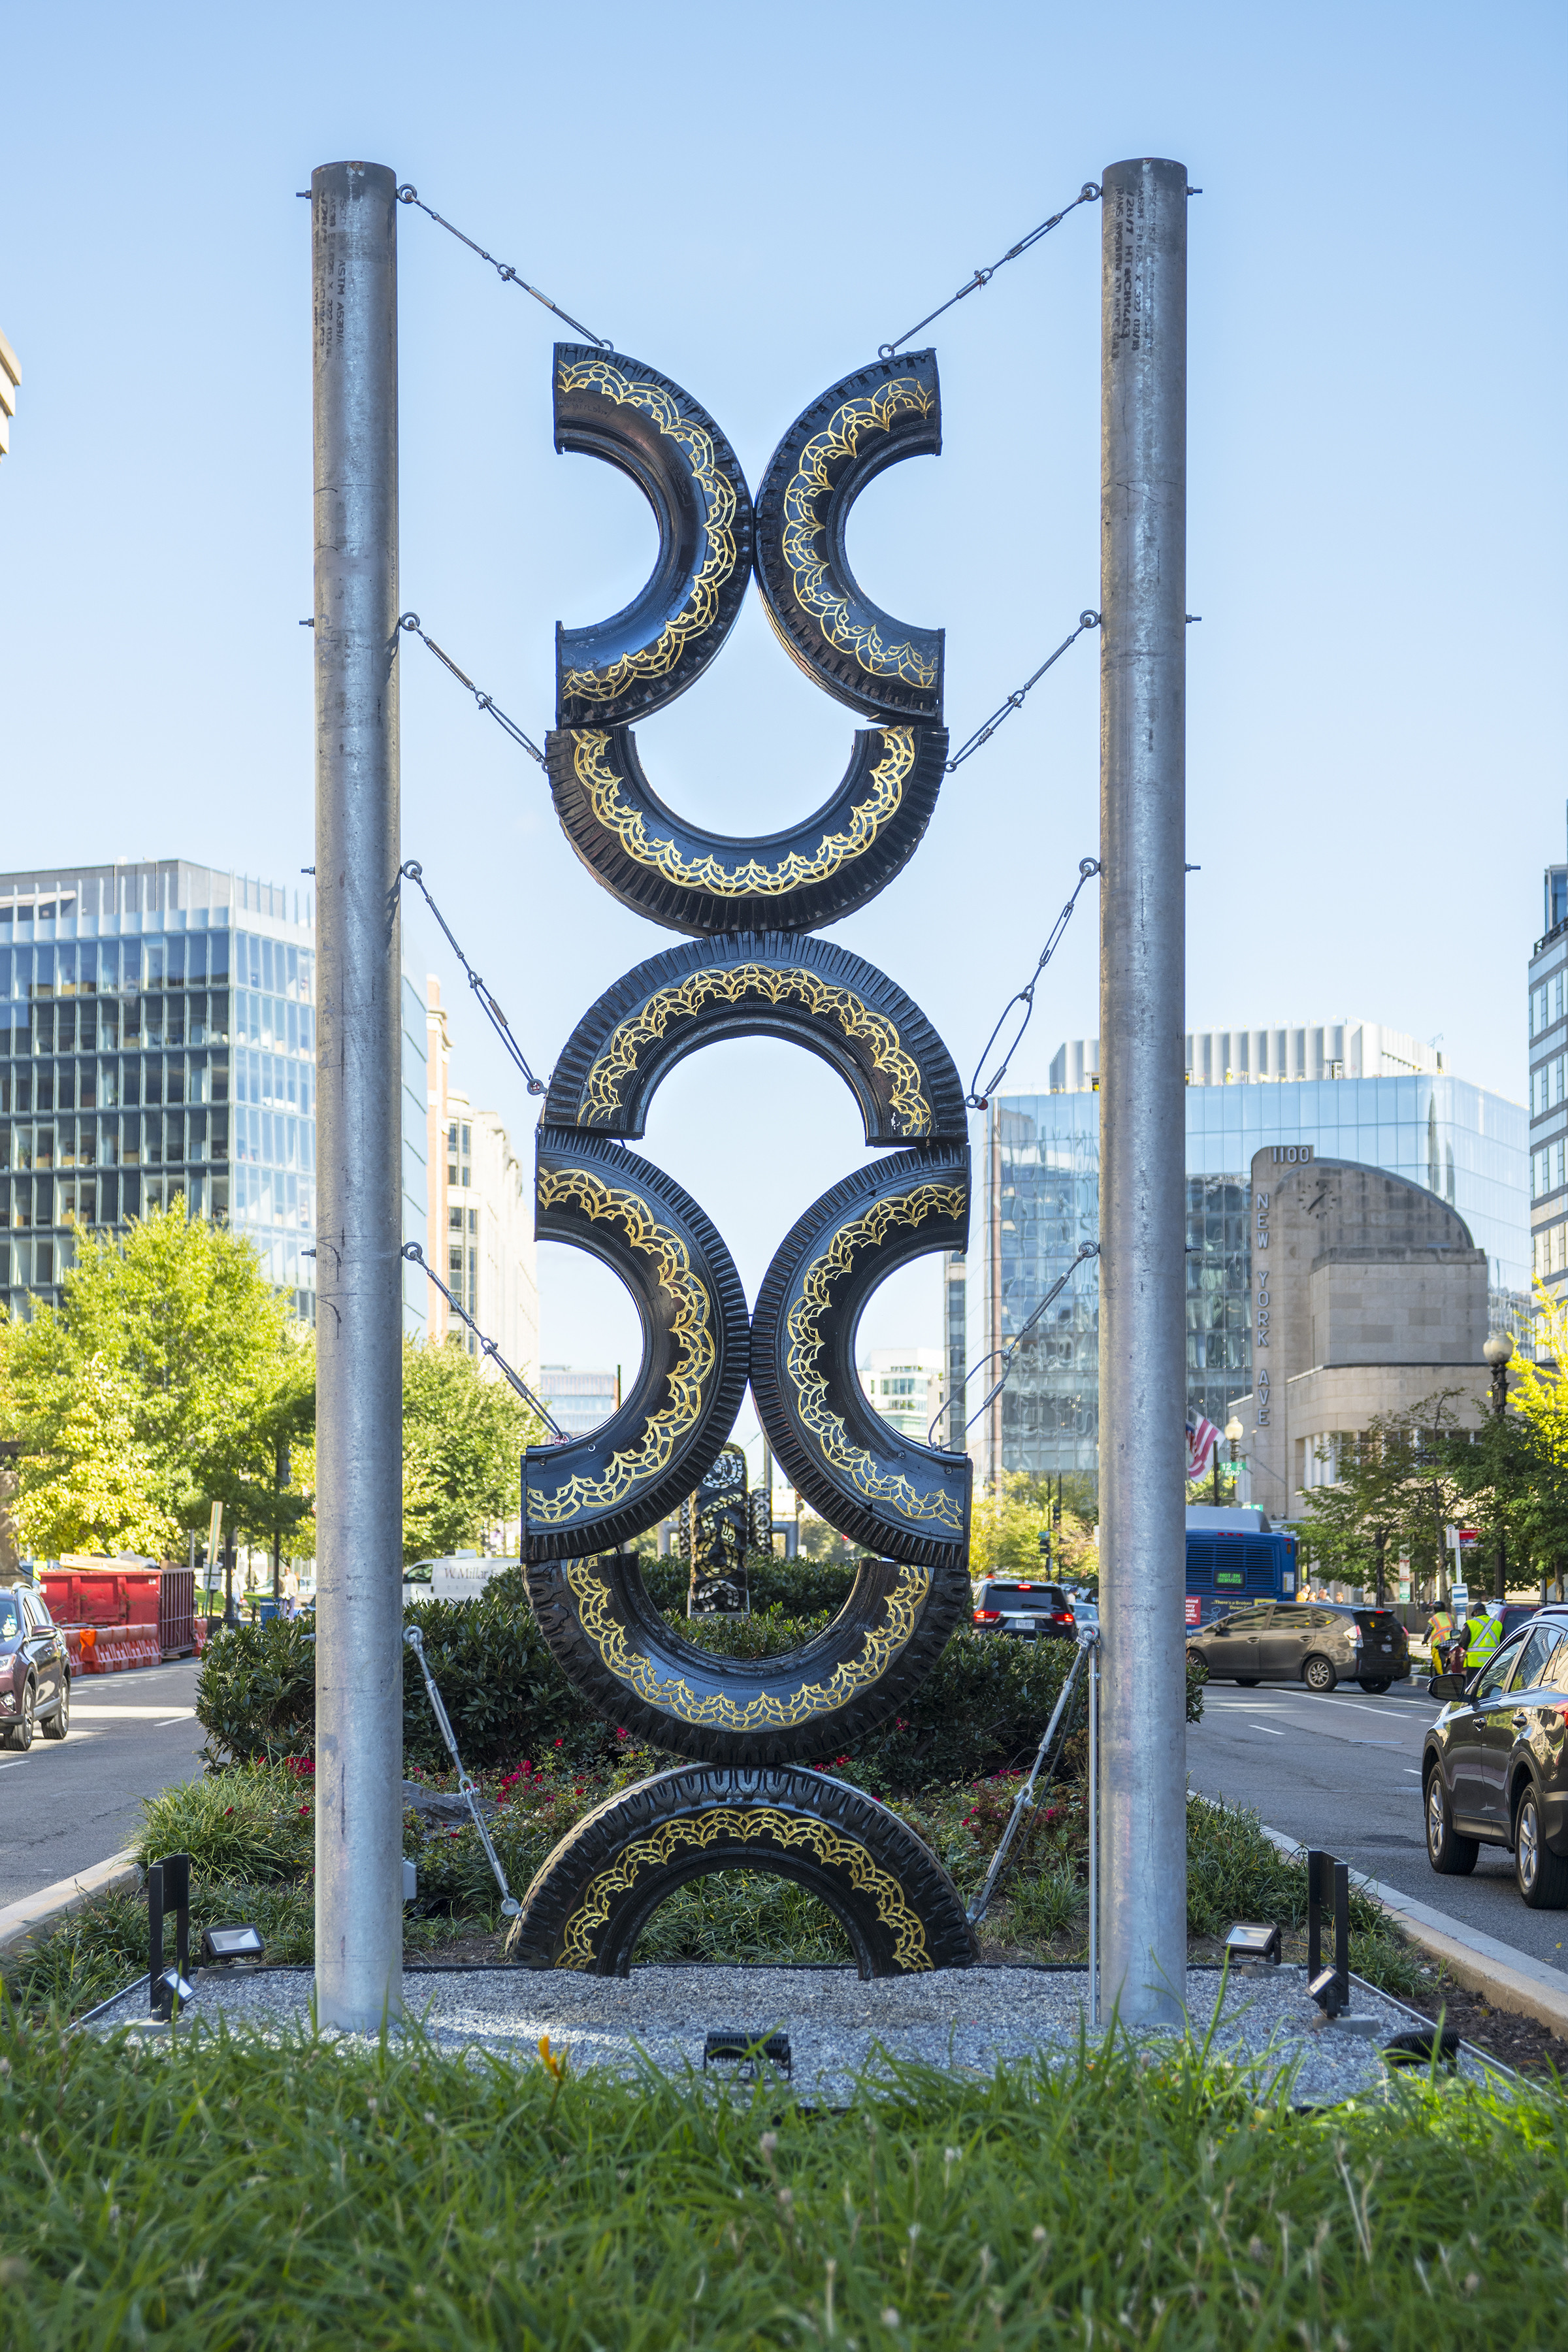 Daytime view of a city street shows a large sculpture made of eight half-tires arranged into stacked hourglass shapes. Engravings, and gold leaf decorate the structure. The sky is bright blue and cloudless.